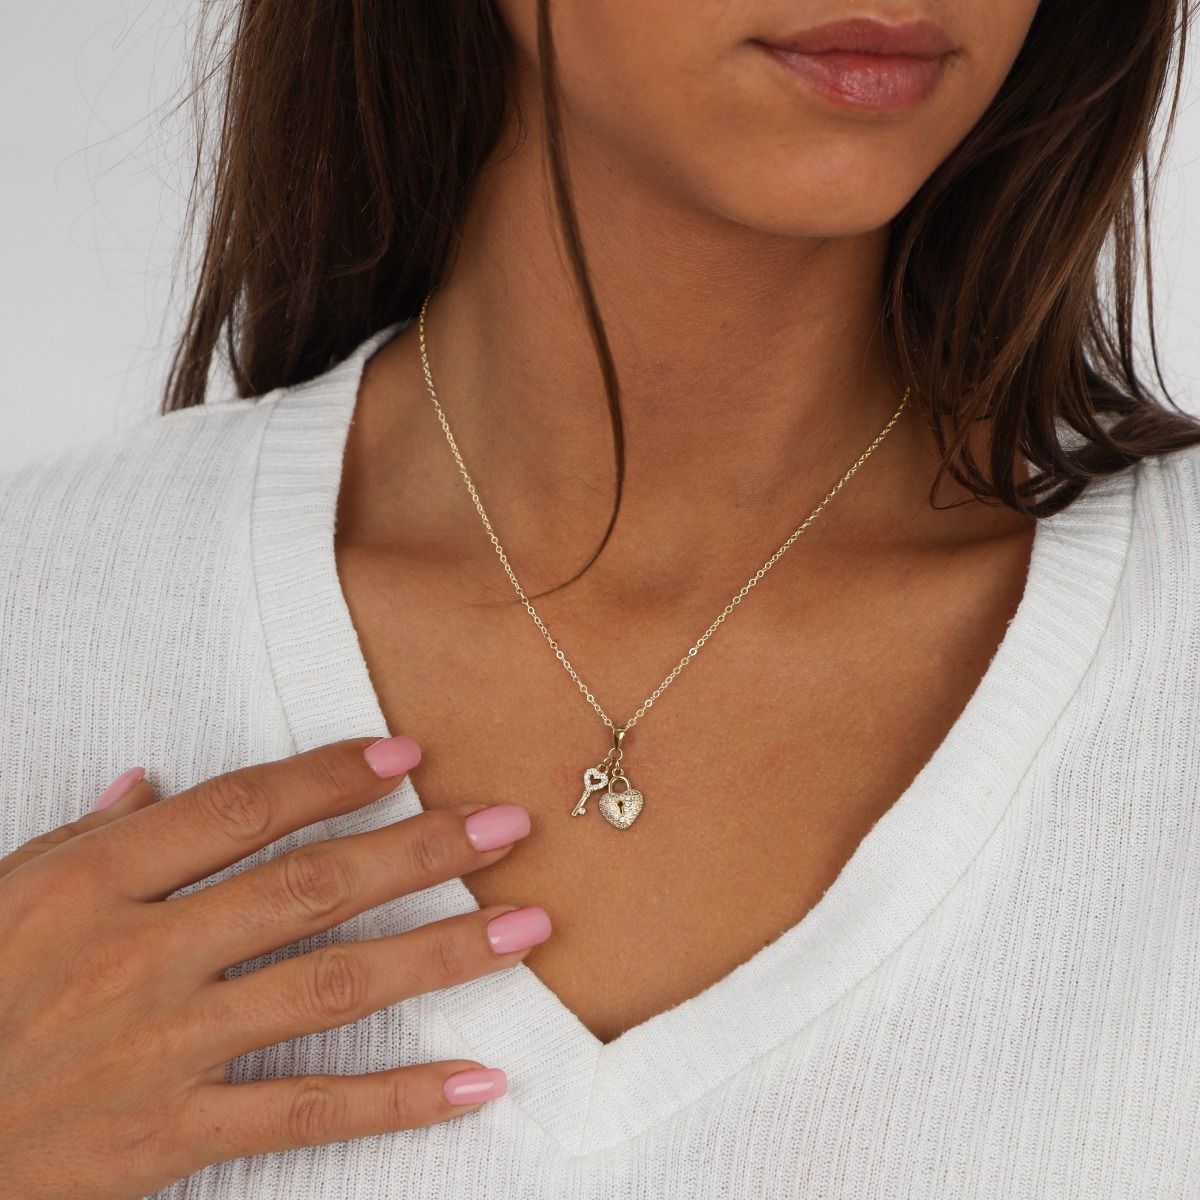 Key To My Heart Necklace (18K Gold Plated) - Gifts For Her